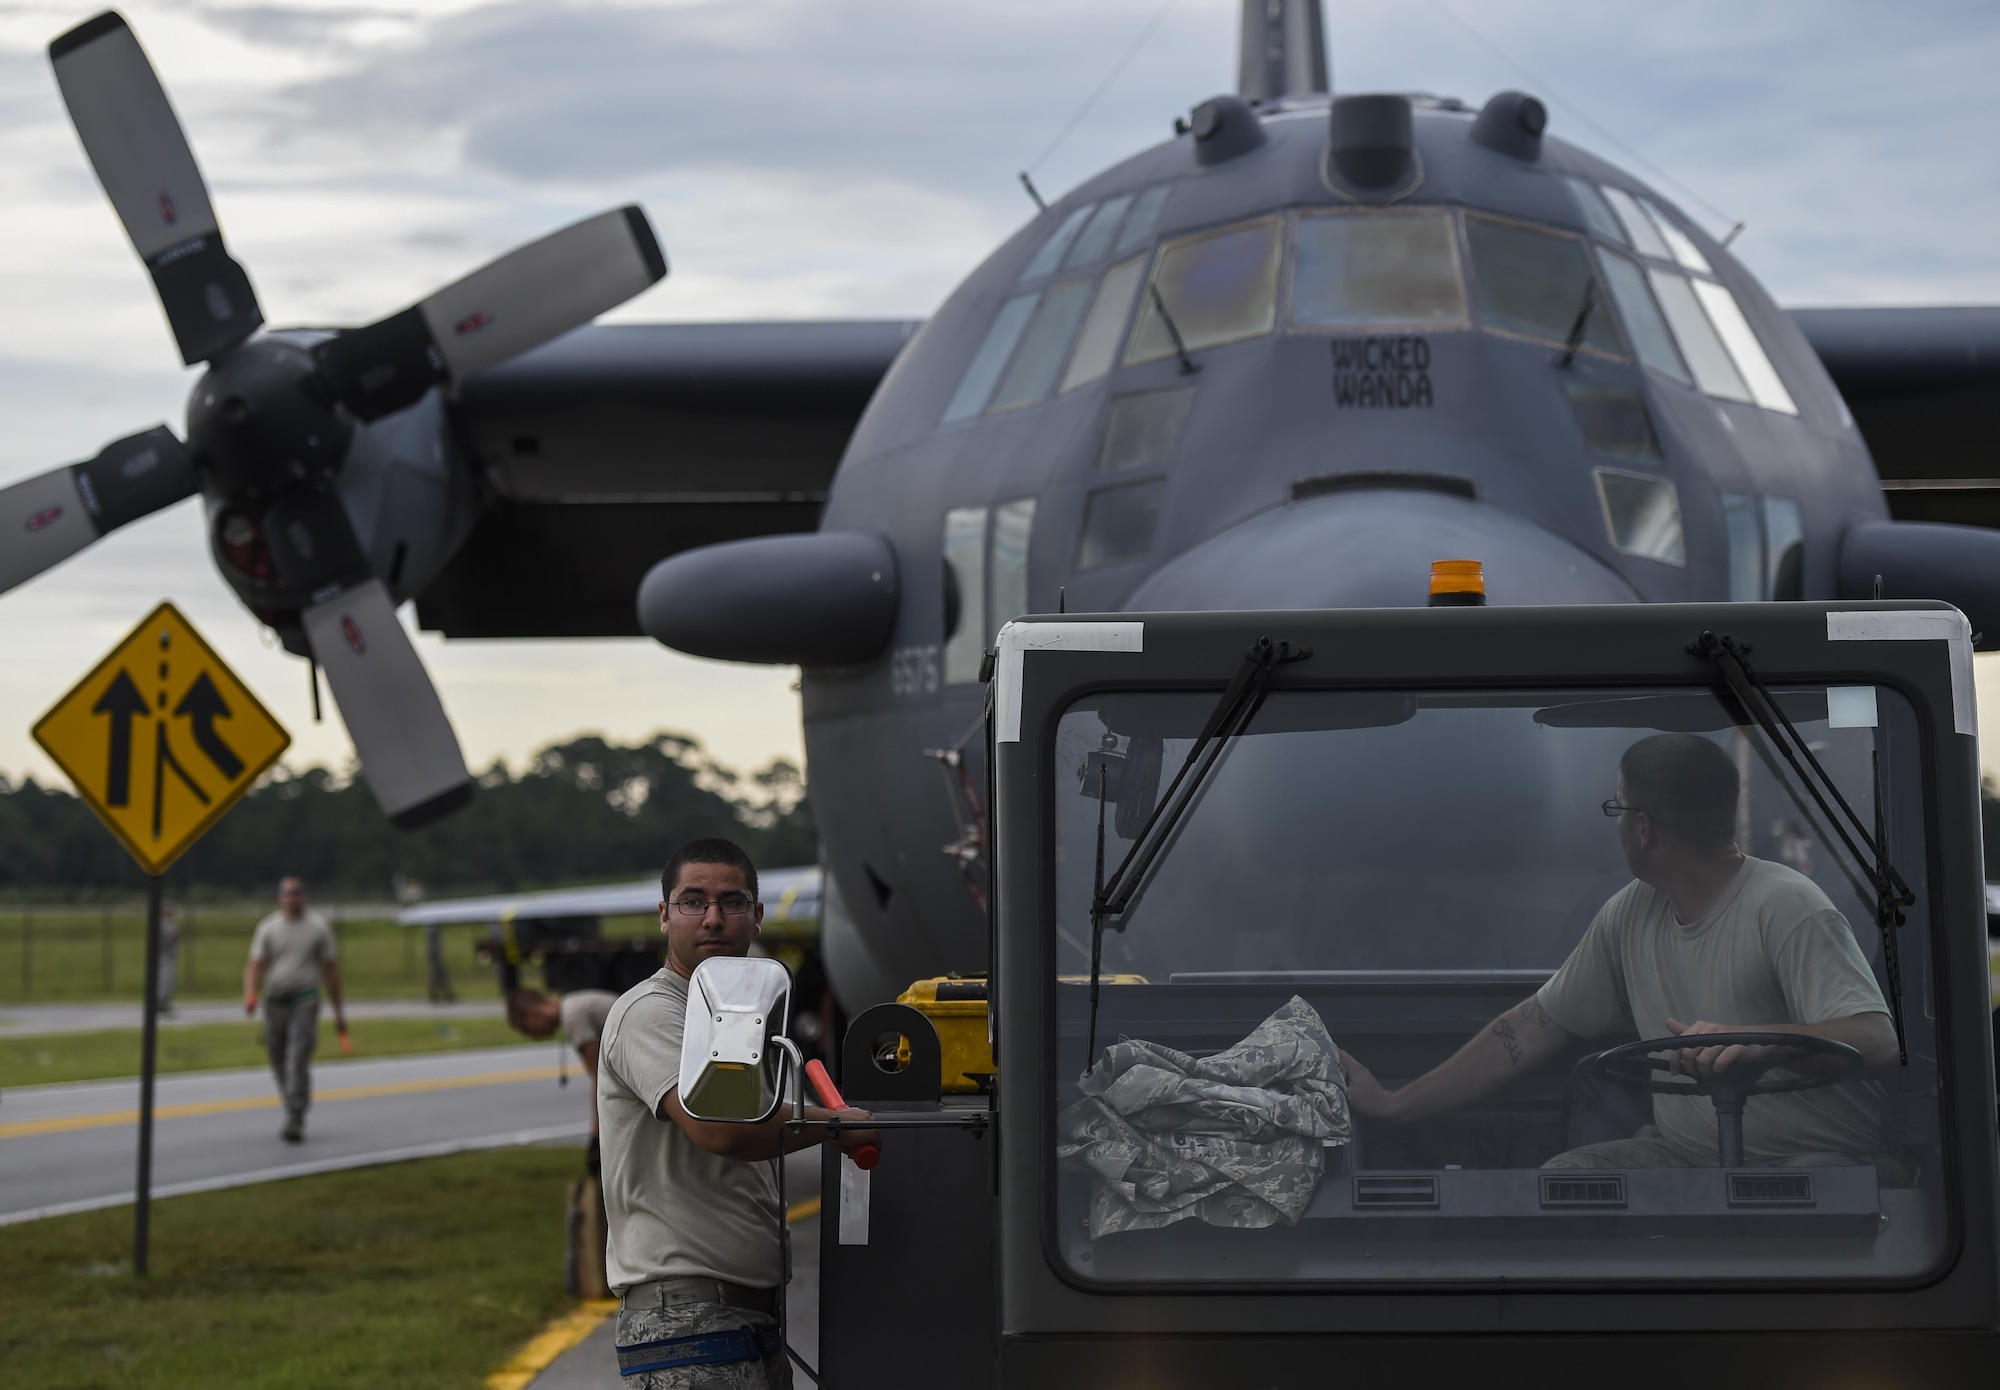 Airmen with the 1st Special Operations Aircraft Maintenance Squadron tow an AC-130H Spectre to the Air Park on Hurlburt Field, Fla., Aug. 15, 2015. The Spectre was towed from the flightline and staged for installation in the Hurlburt Field Air Park. The AC-130H fleet retired May 26, 2015, after more than 45 years of service. The installation process for this aircraft, known as “Wicked Wanda,” is set to be complete by Aug. 28, 2015. (U.S. Air Force photo by Airman Kai White/Released)